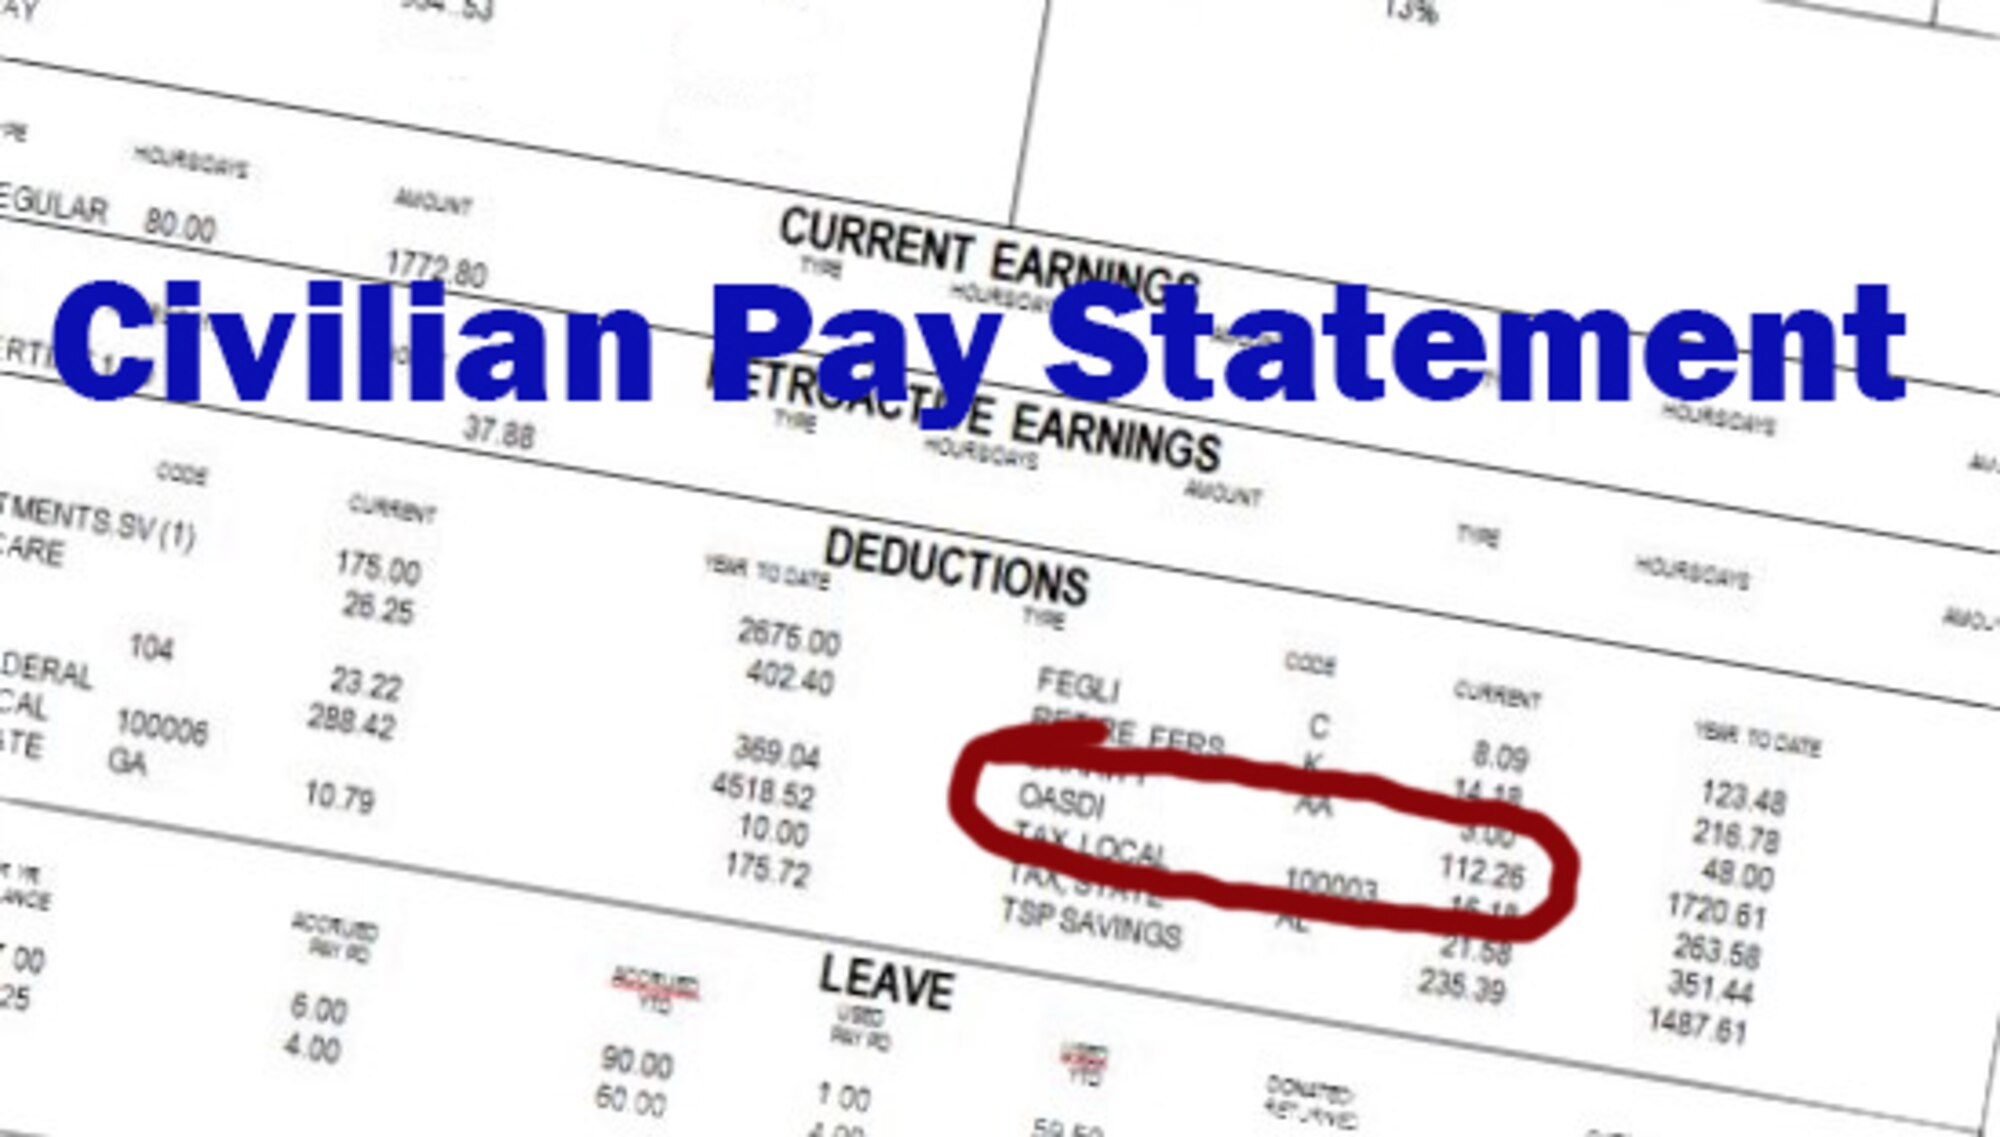 Illustration to show location of Social Security taxes on civilian pay statements